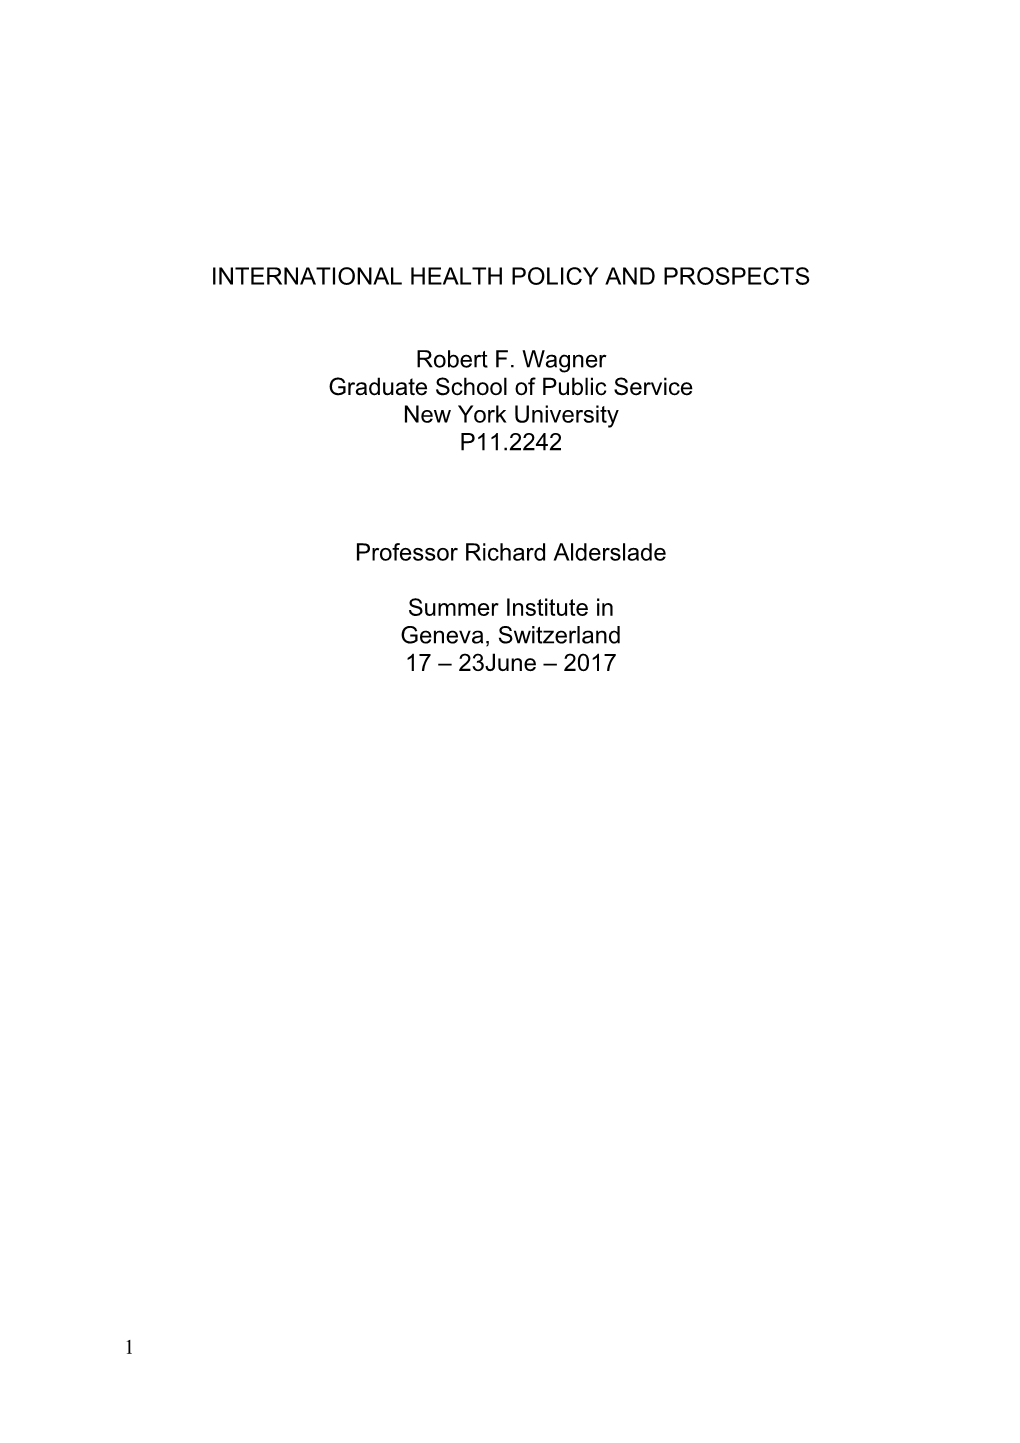 International Health Policy and Prospects